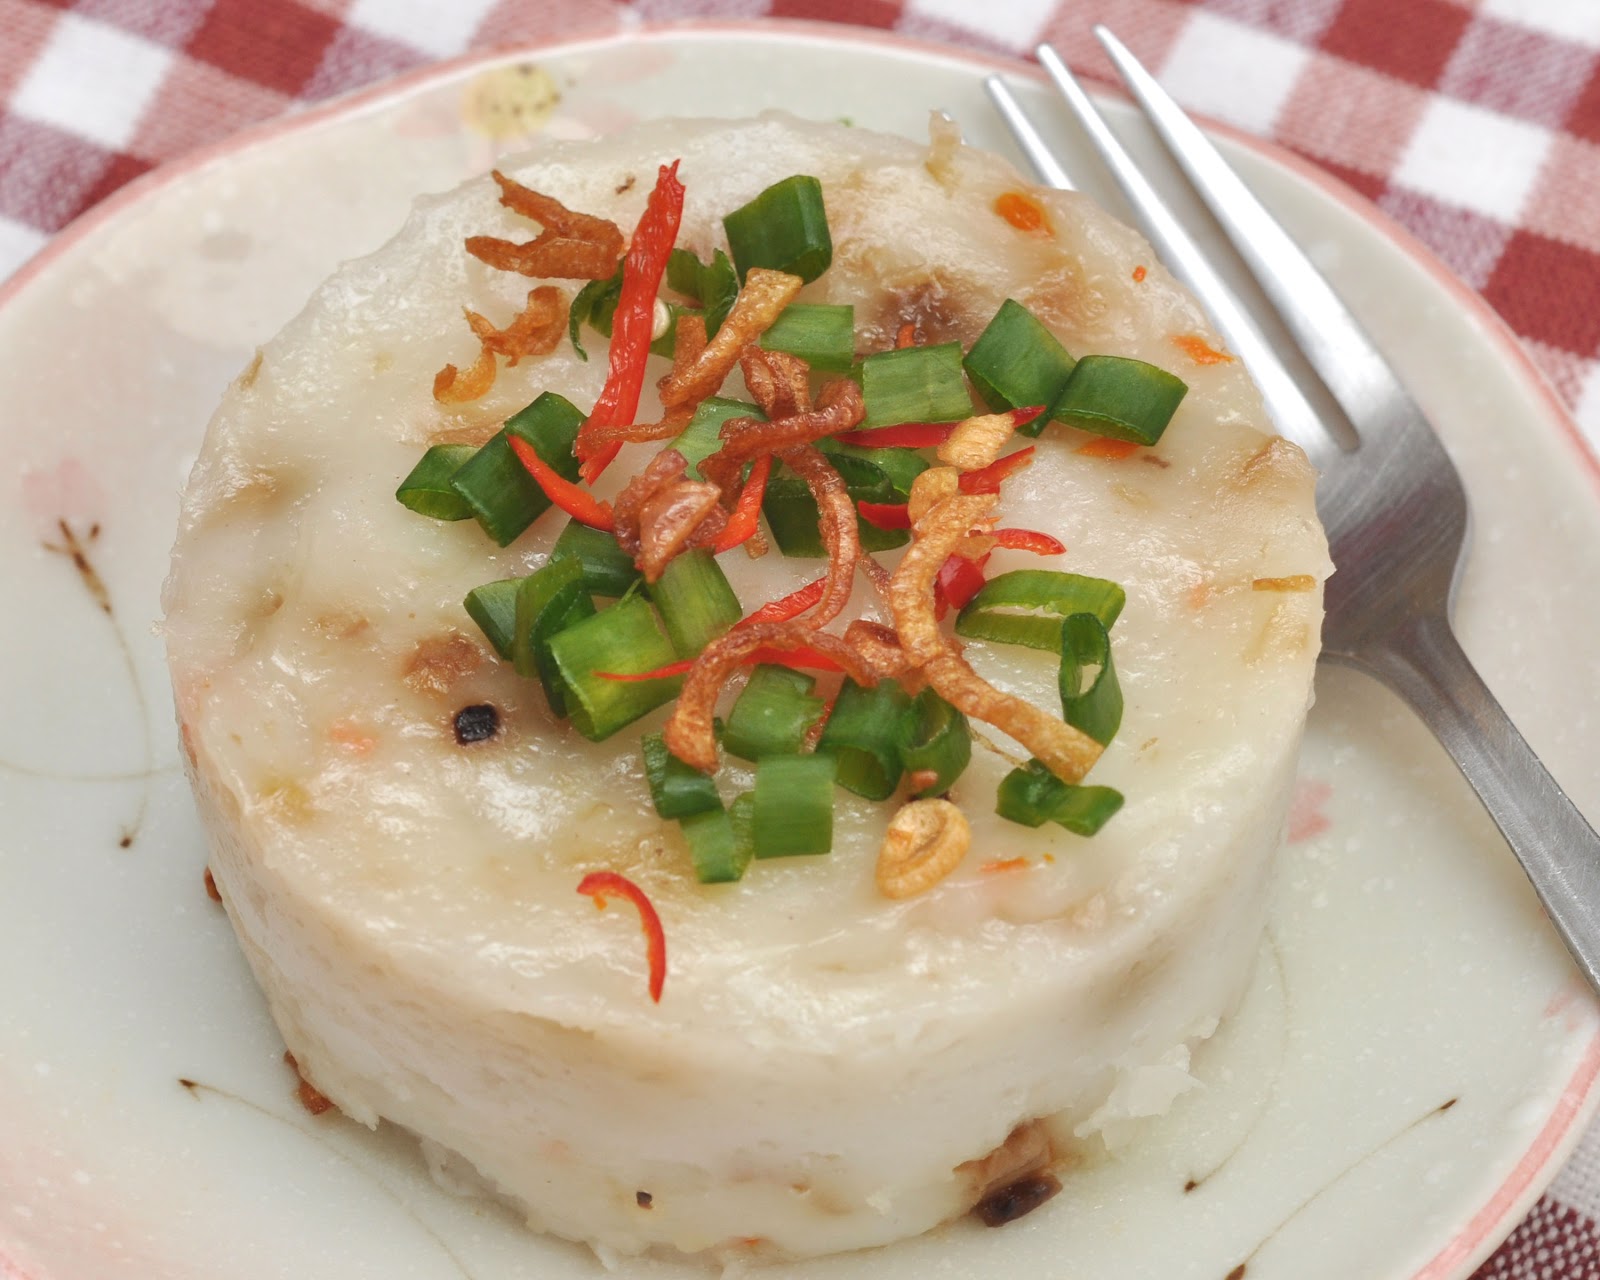 Veronica's Kitchen: Steamed Small Bowl Rice Cake (Wan Kuih)- 碗糕